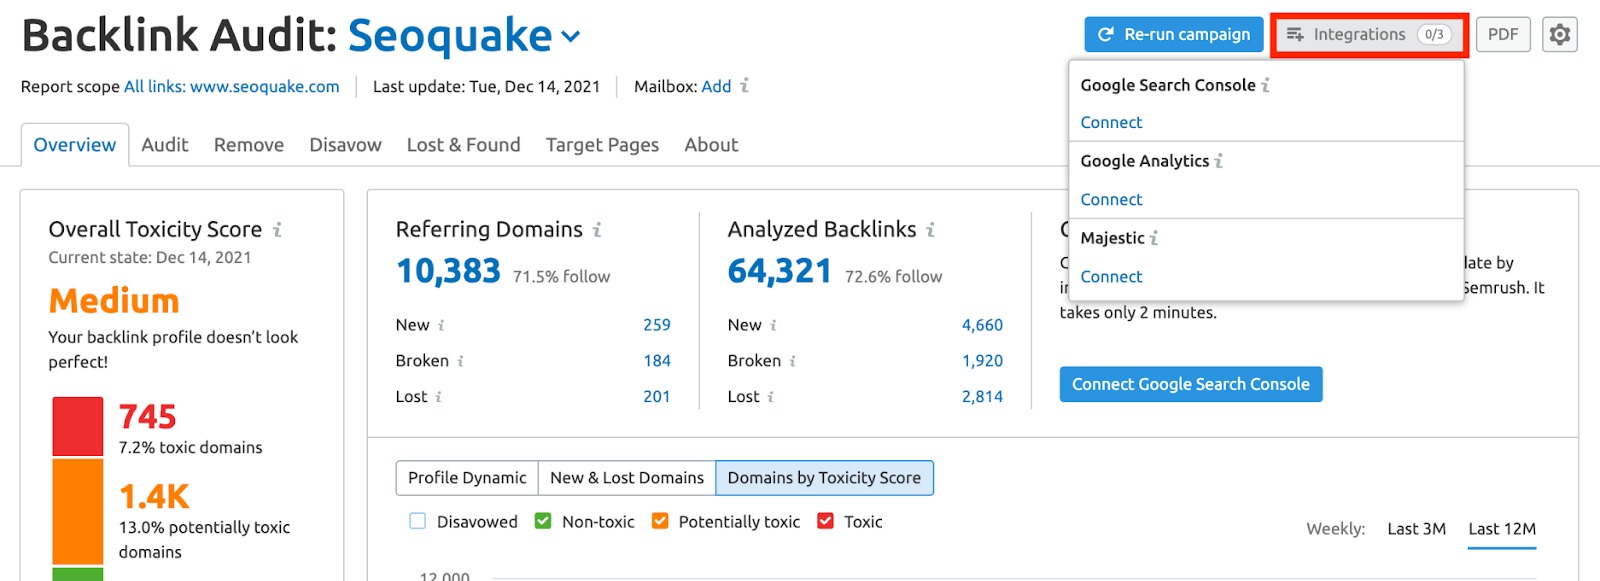 Connecting Backlink Audit to Google Accounts image 1